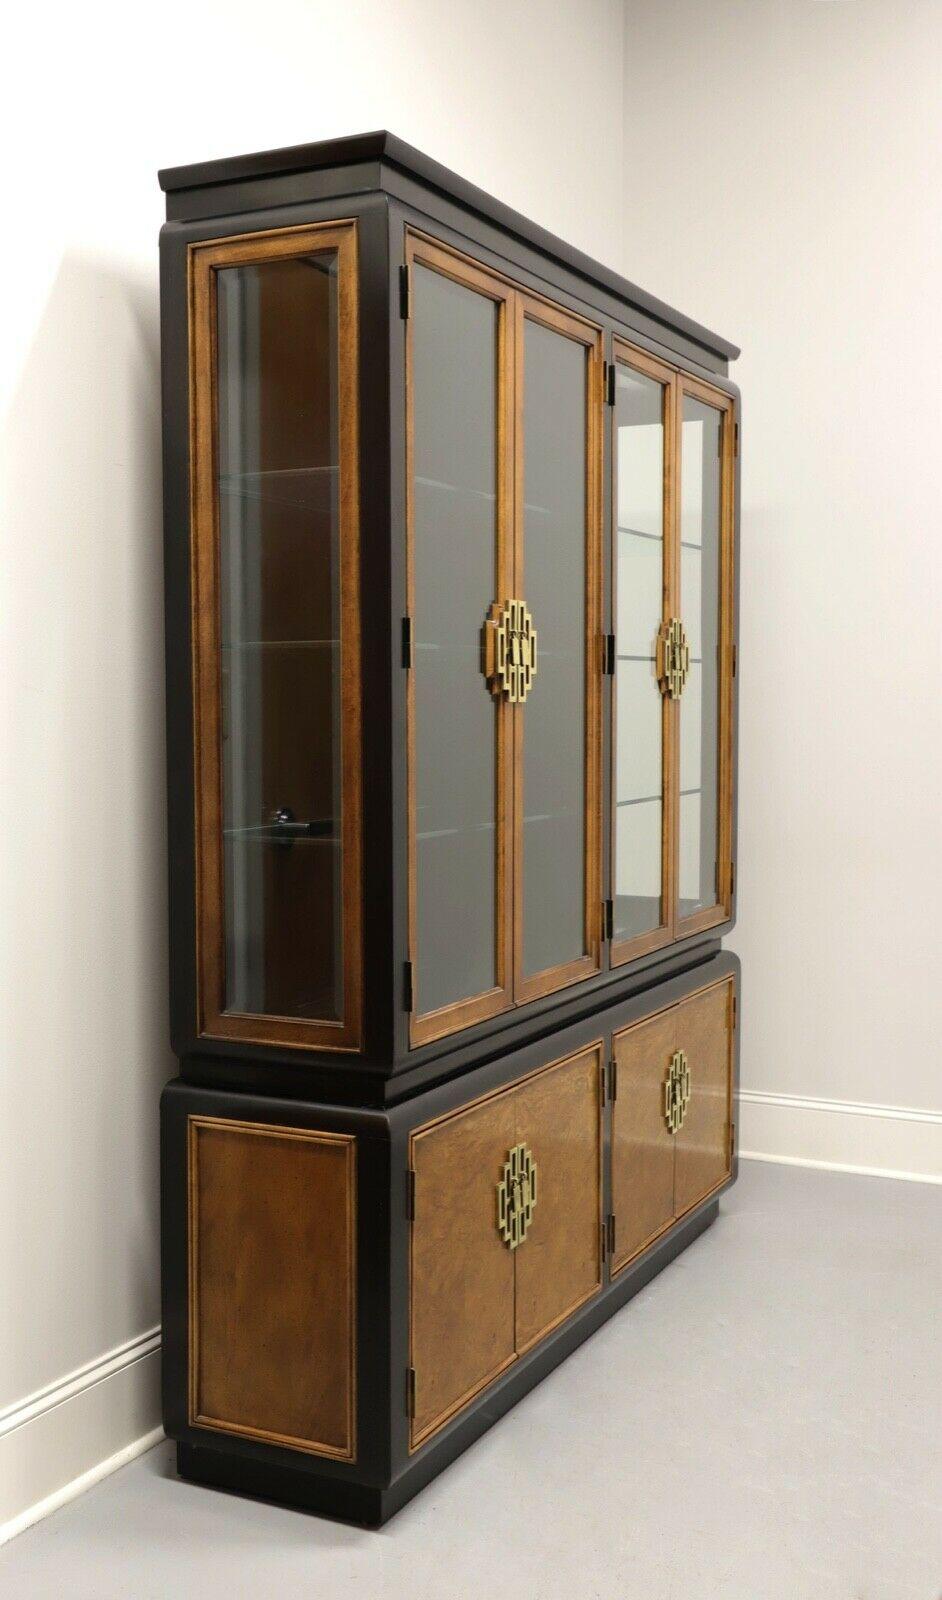 An Asian style dual china display cabinet by high-quality furniture maker Century, from their 